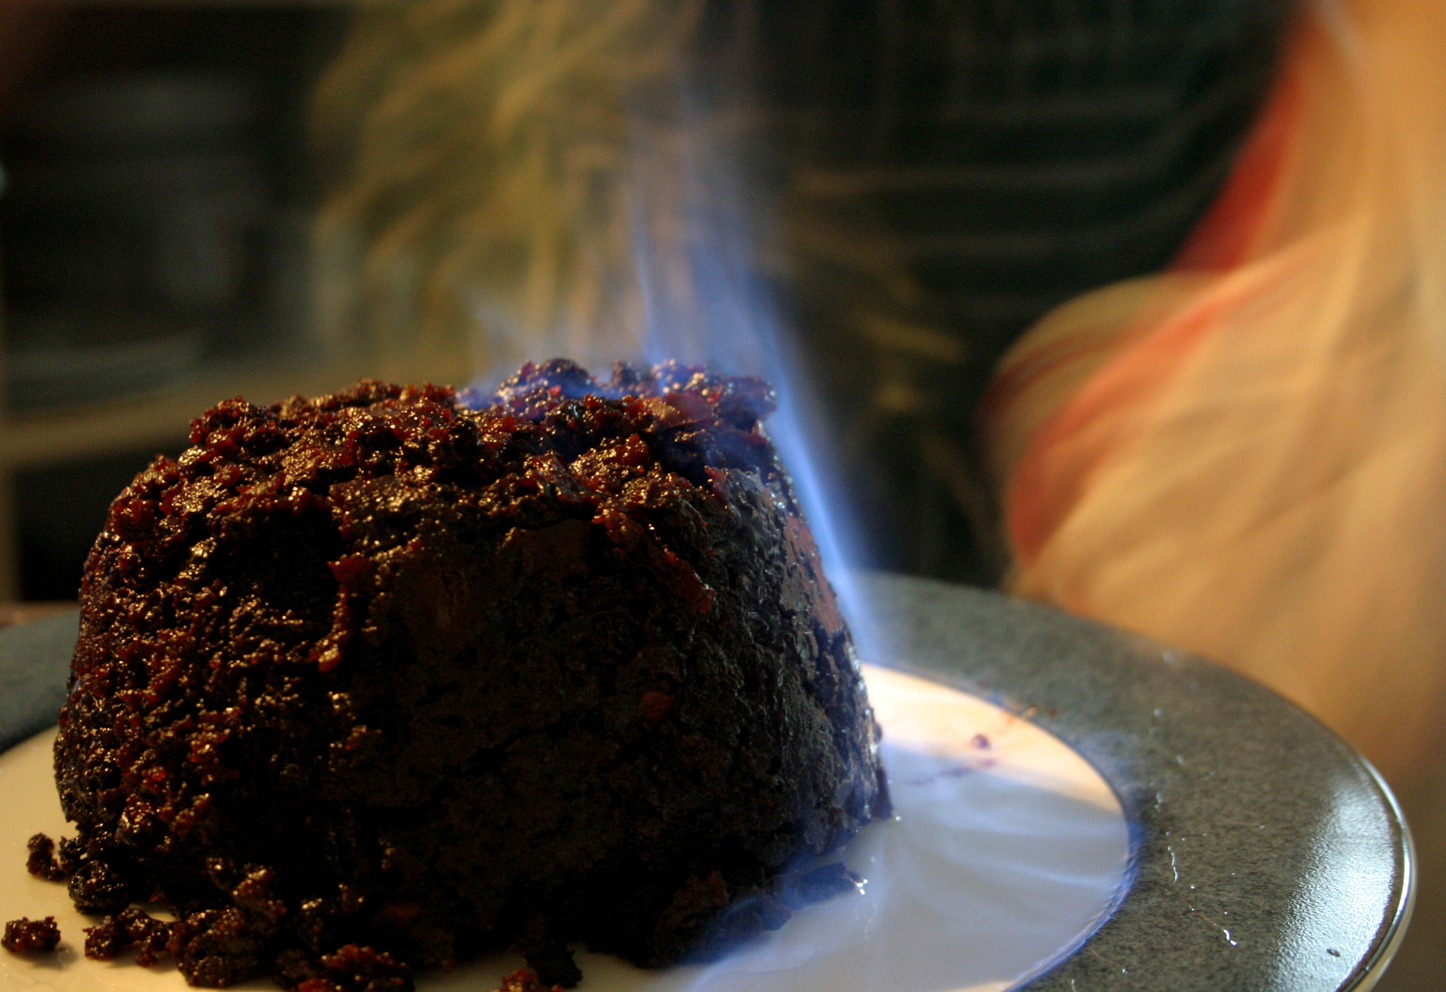 Figgy Pudding: Why won’t we leave until we get some?